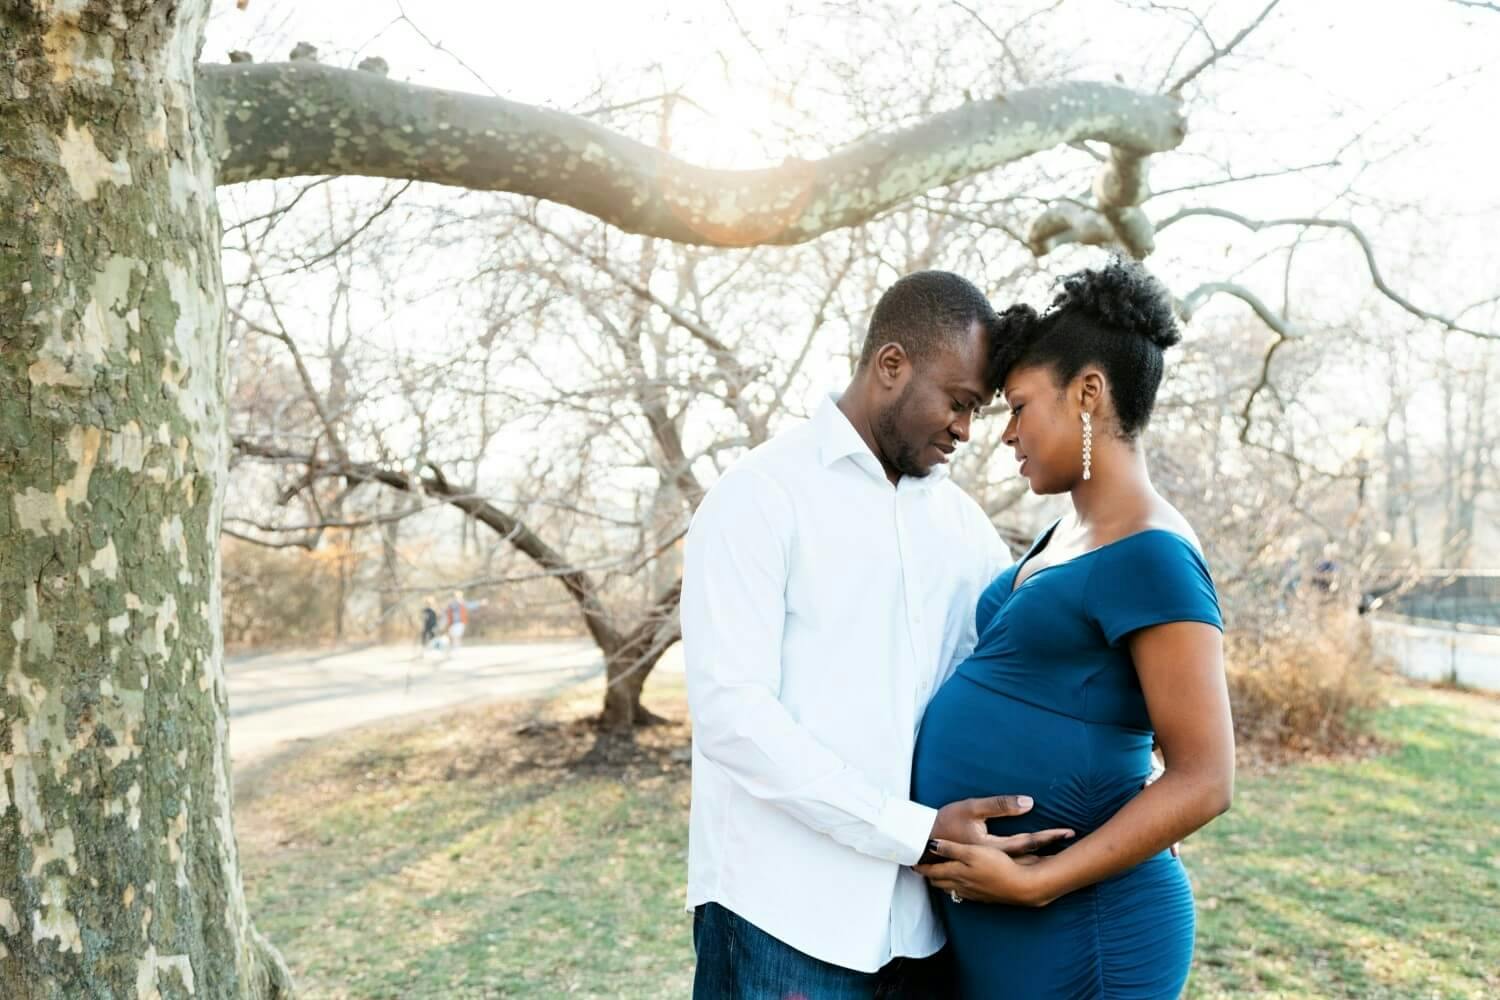 A pregnant woman and her partner touching her belly under a tree